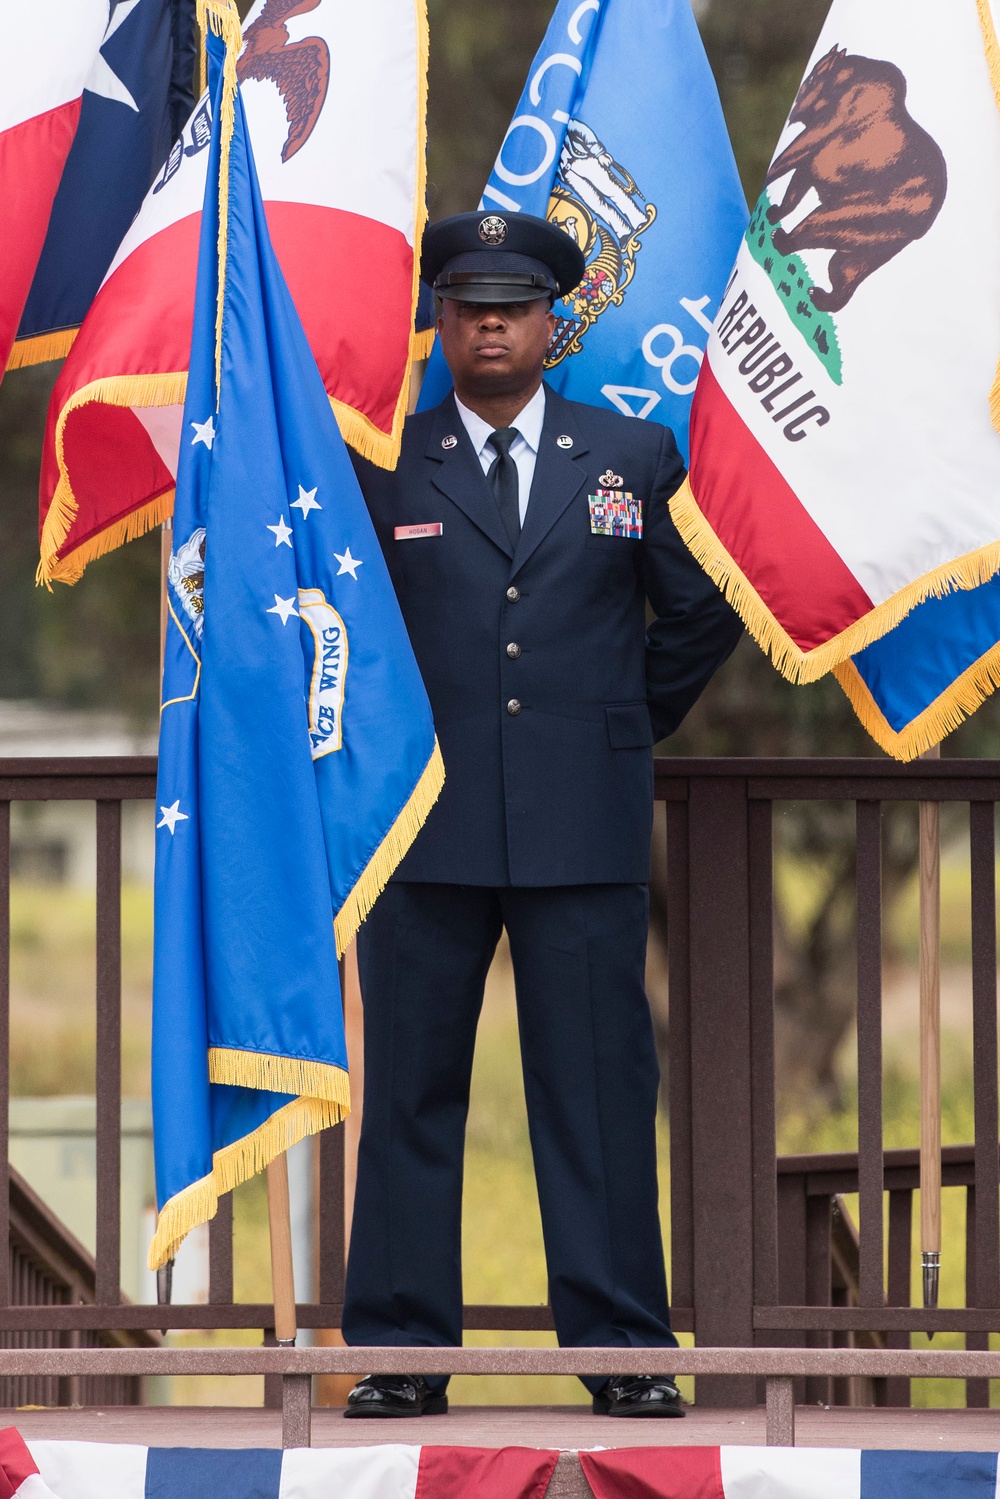 Col. Mastalir assumes command of 30th SW